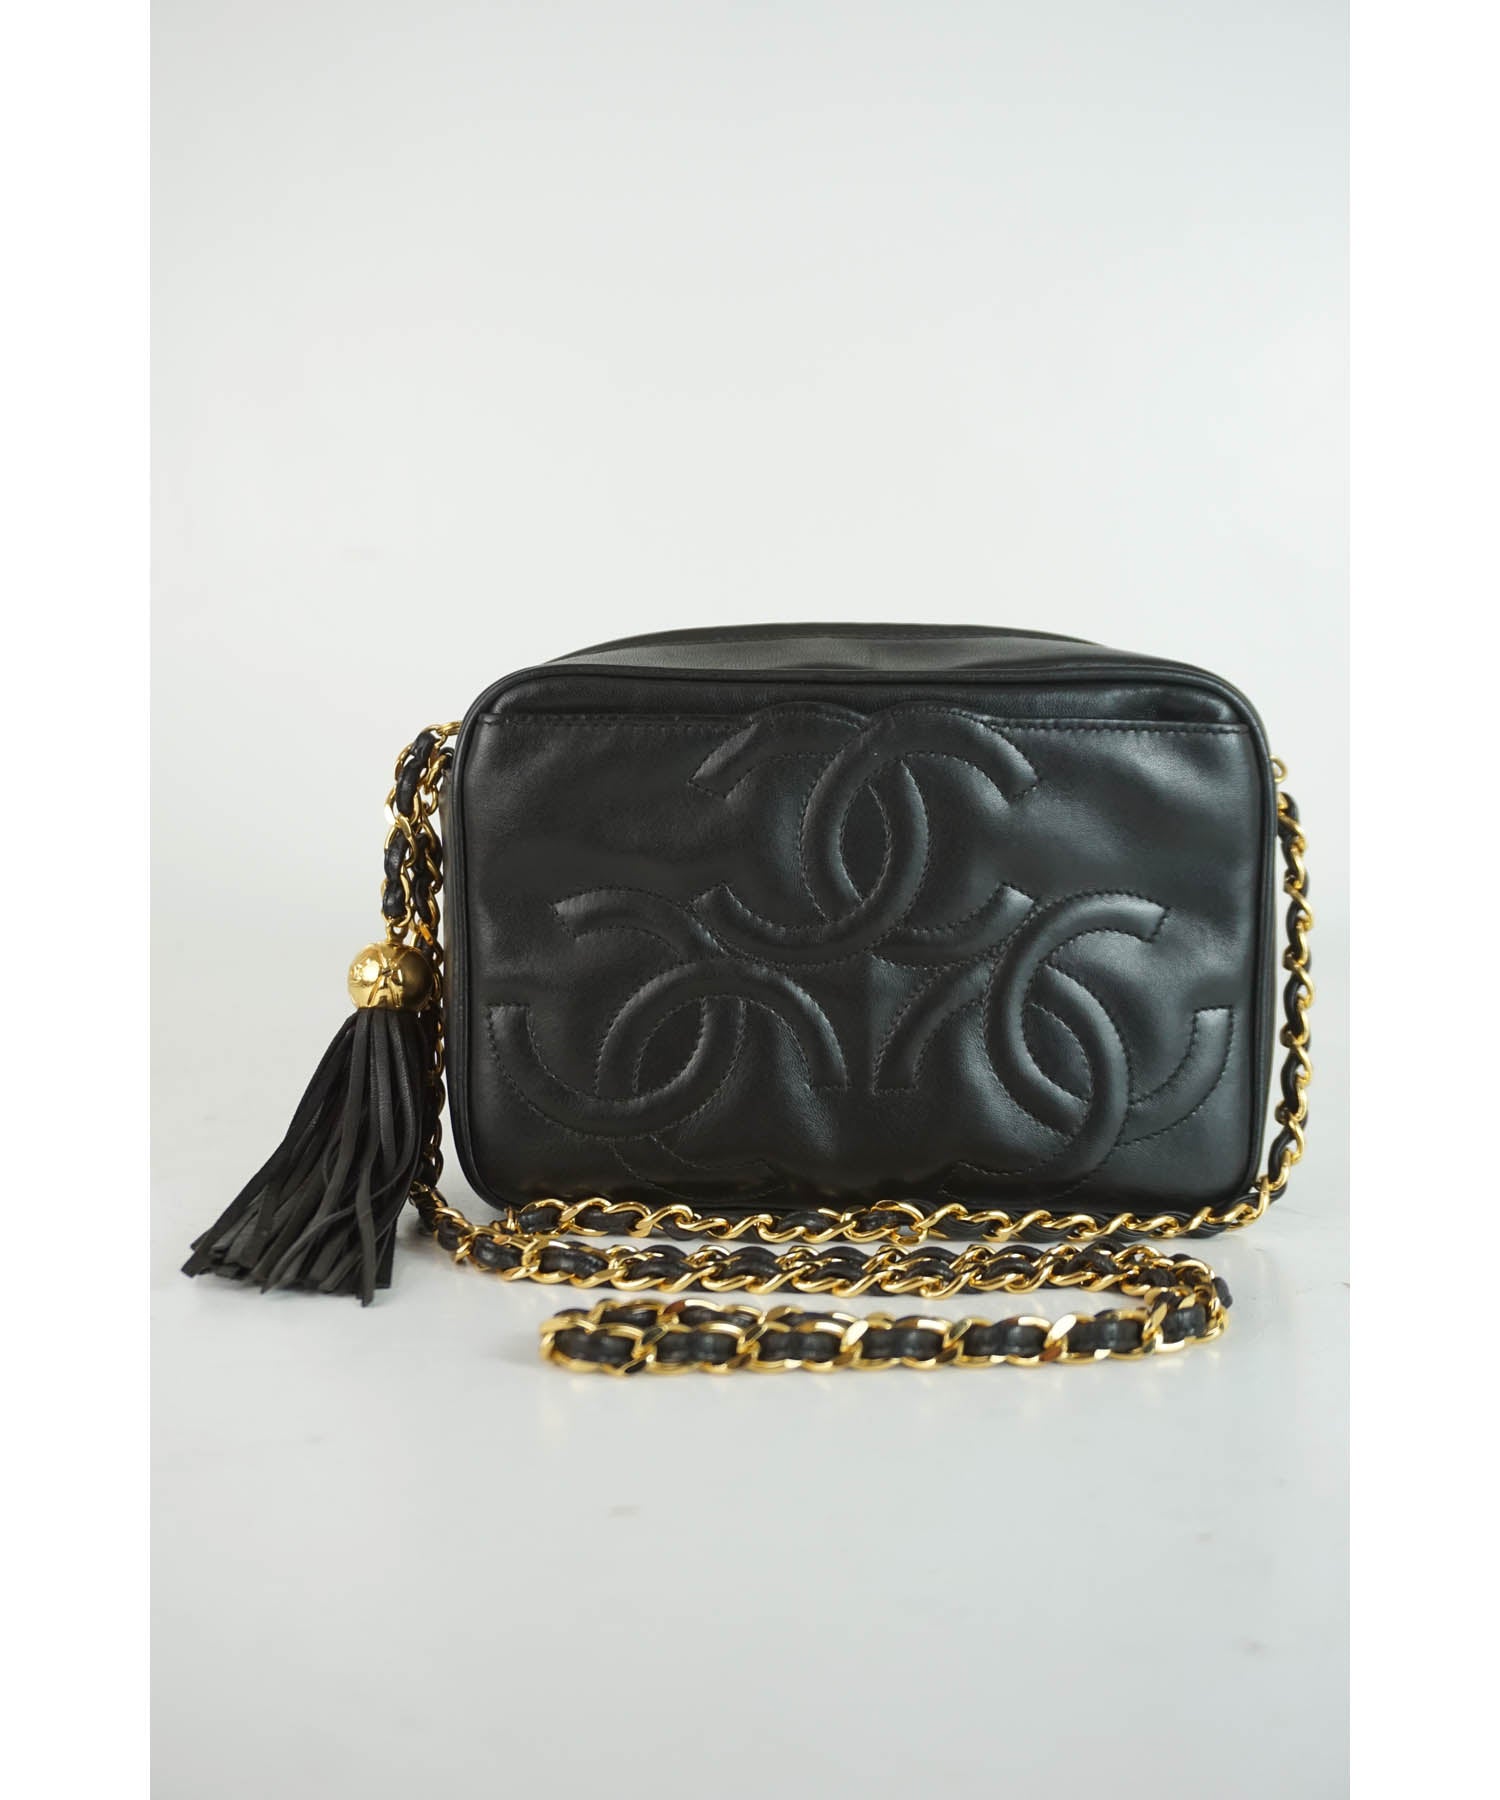 CHANEL Black Bags & Handbags for Women, Authenticity Guaranteed